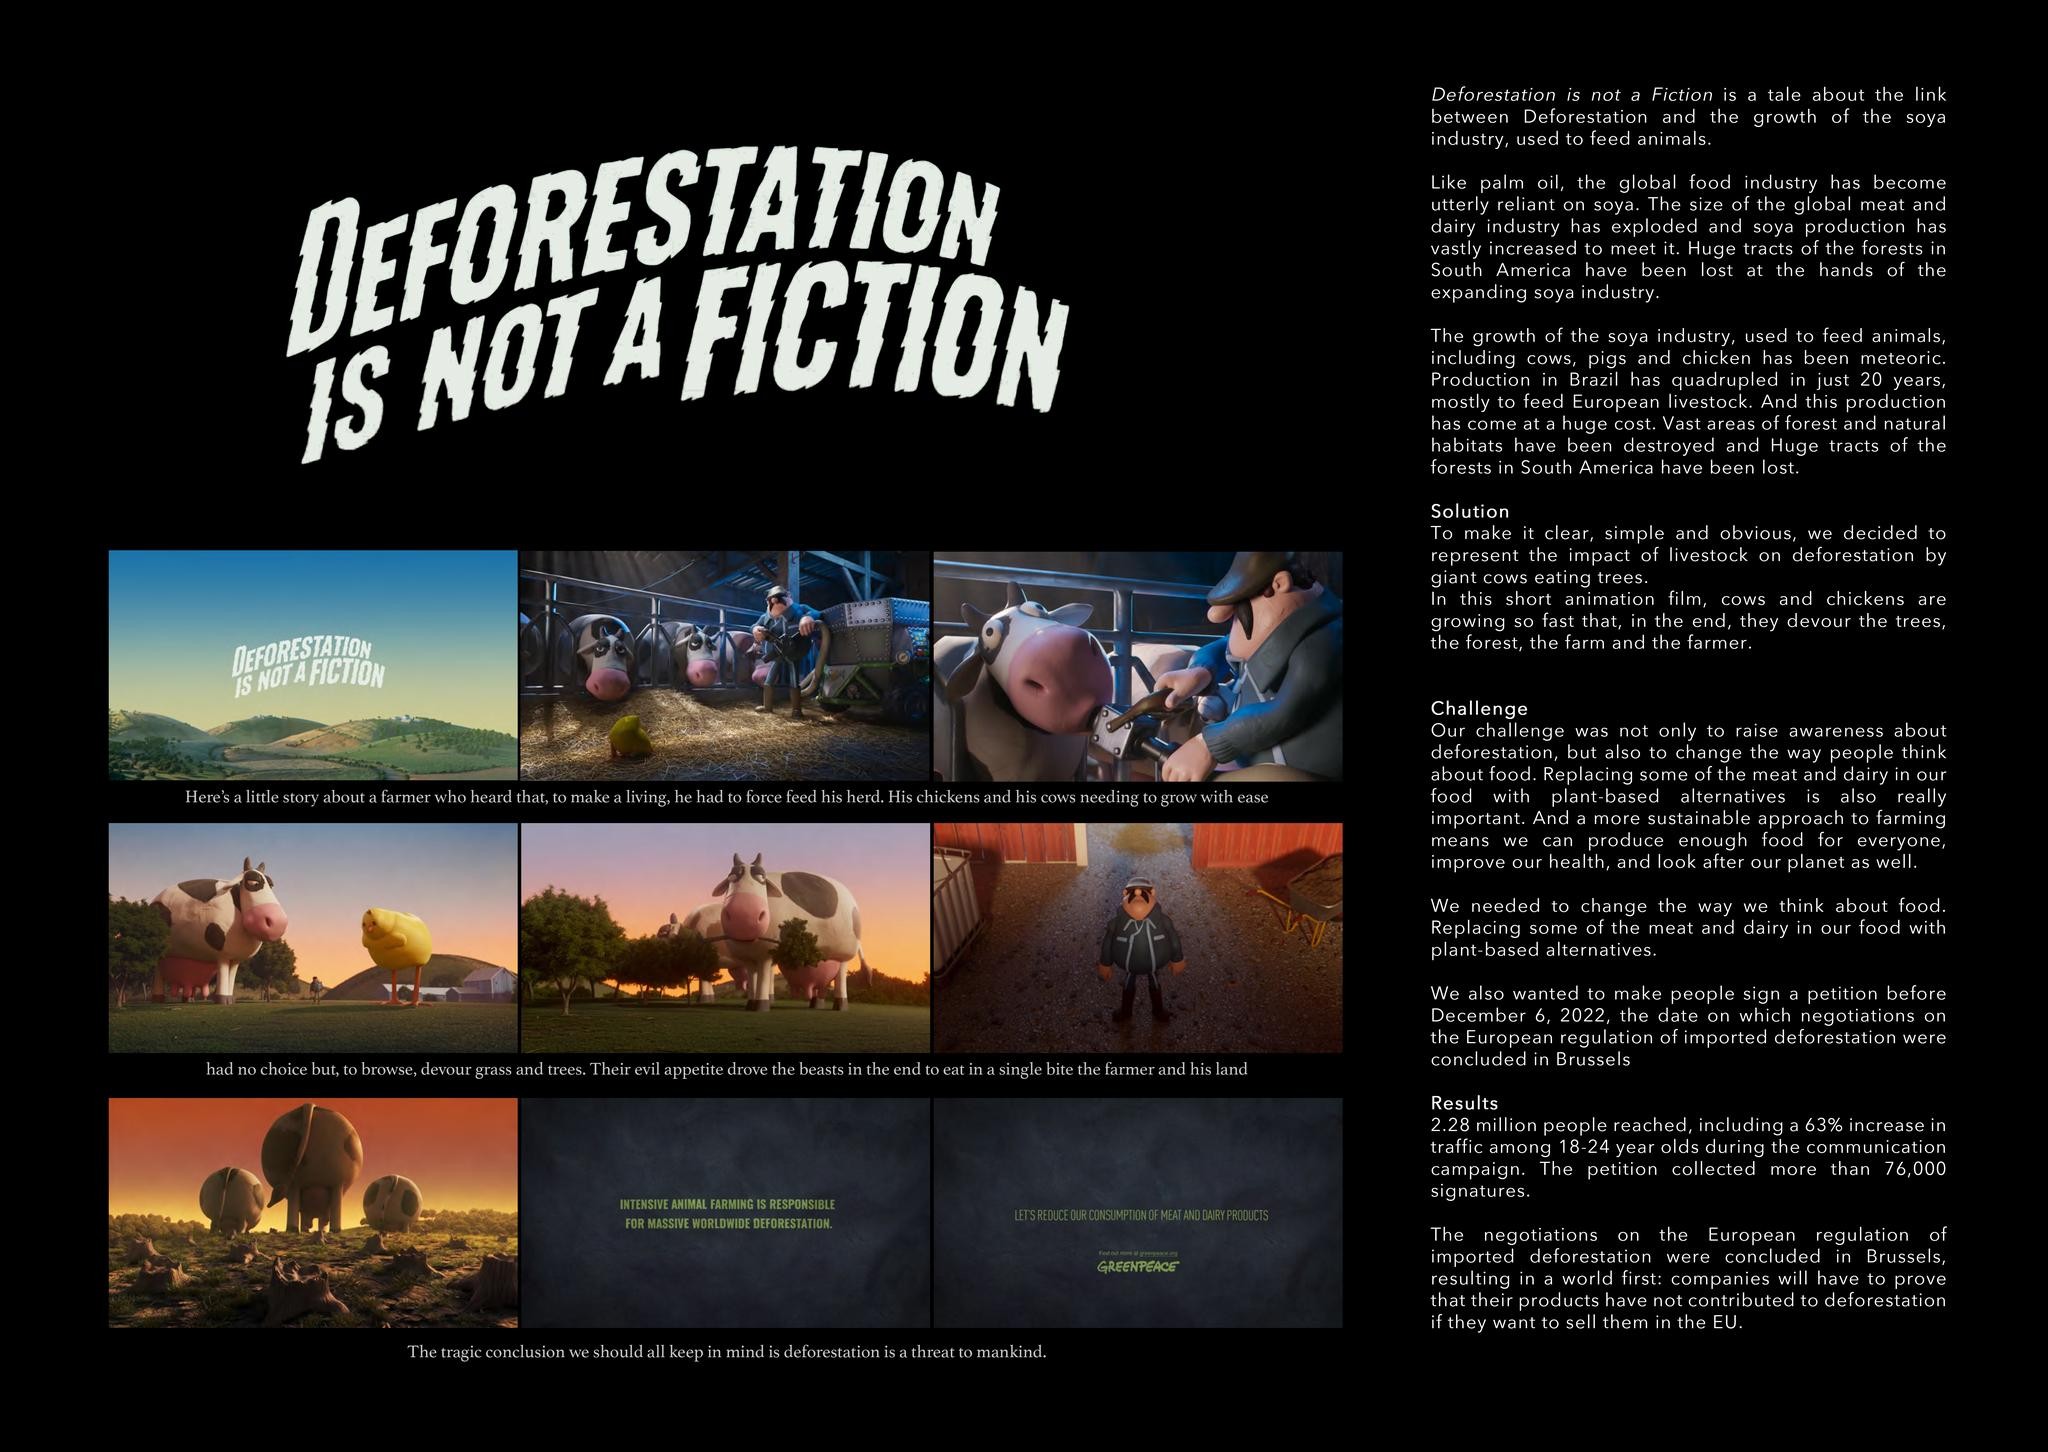 DEFORESTATION IS NOT A FICTION